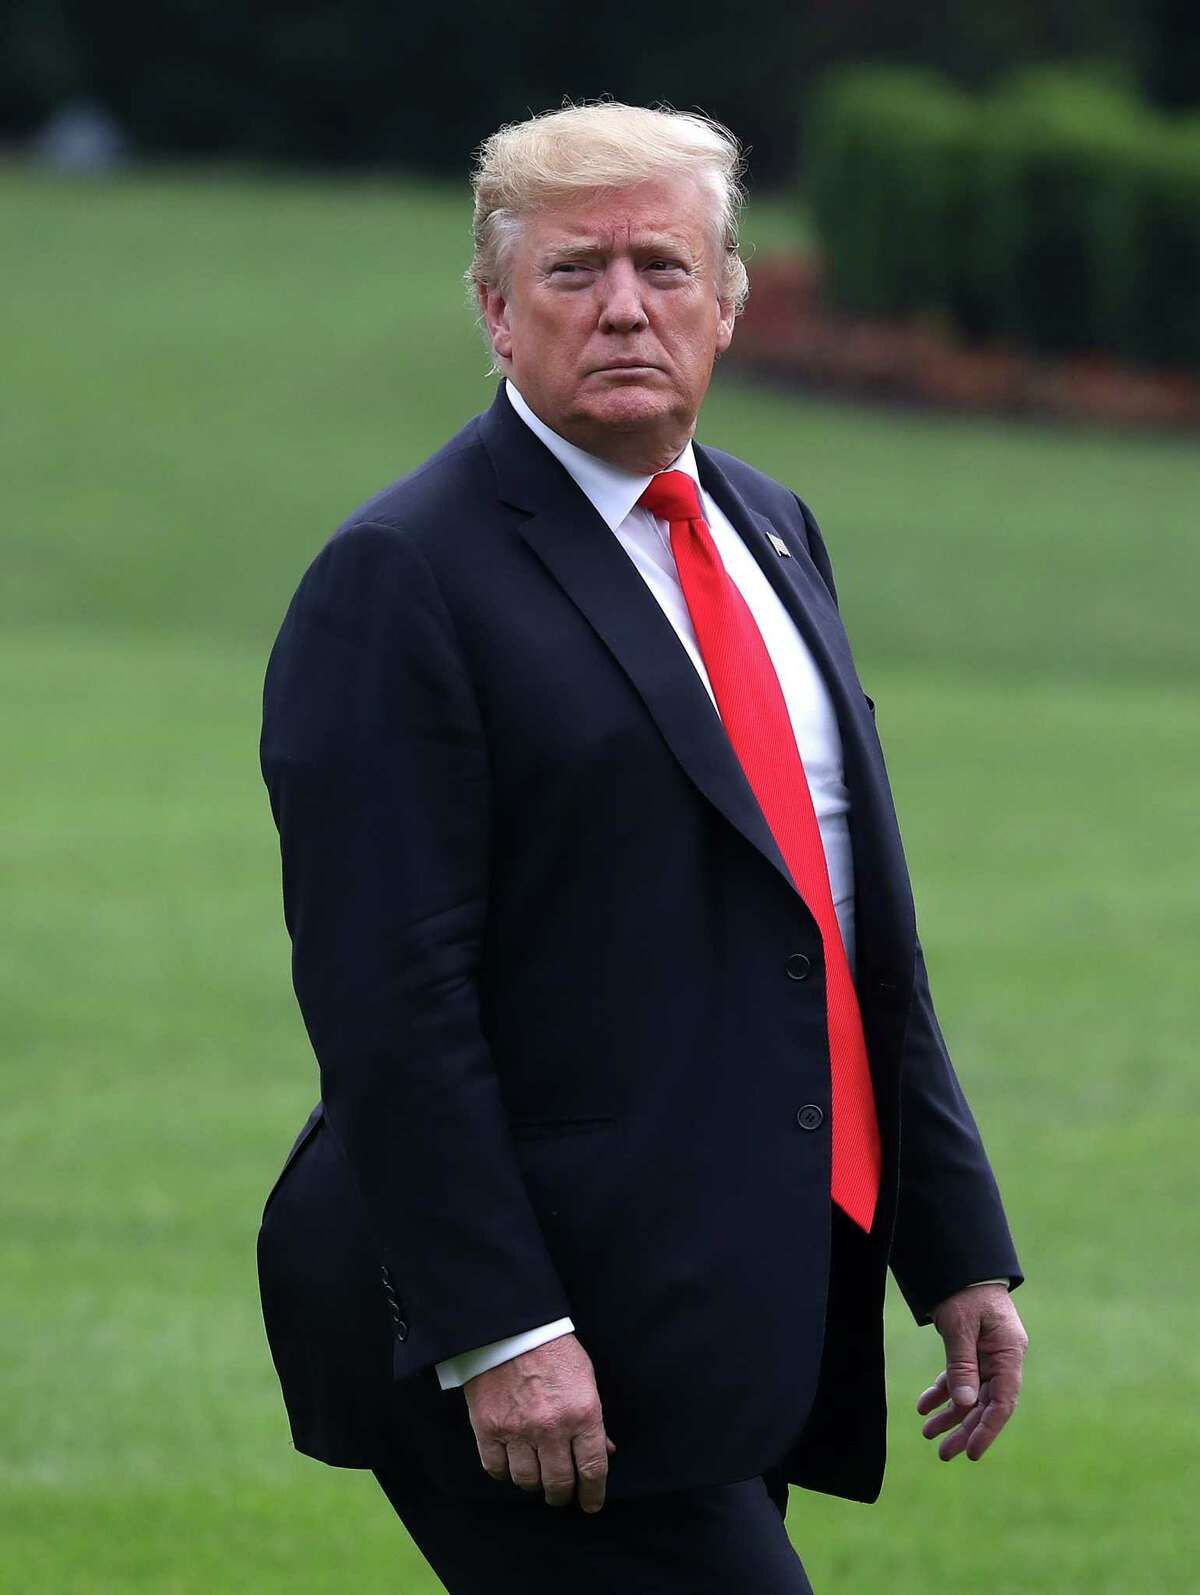 WASHINGTON, DC - MAY 17: U.S. President Donald Trump walks toward the Oval Office after returning back to the White House from a trip to New York City, on May 17, 2019 in Washington, DC. (Photo by Mark Wilson/Getty Images)